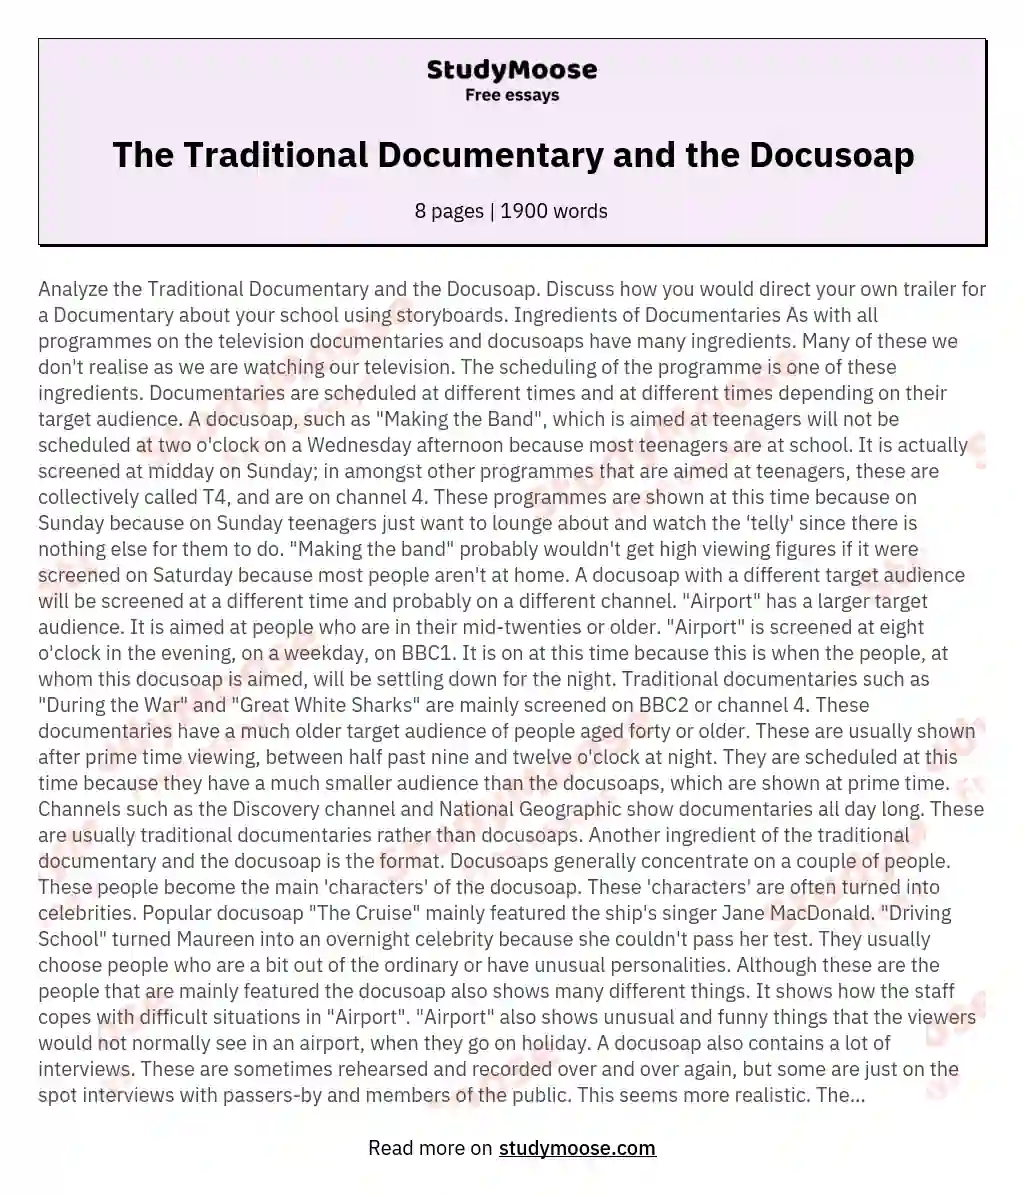 The Traditional Documentary and the Docusoap essay